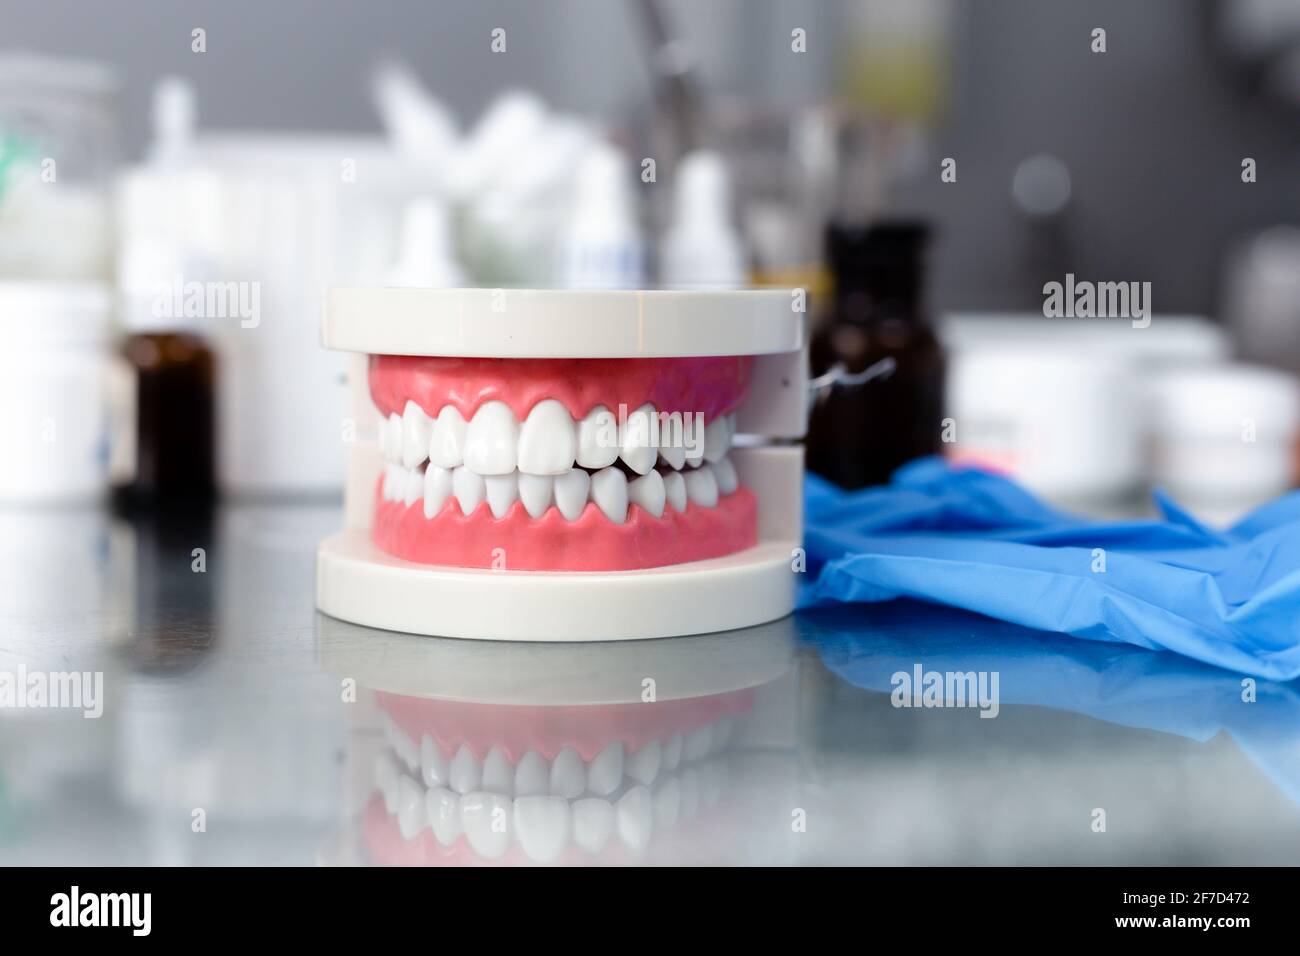 Mock up jaw with teeth on table in dental office Stock Photo